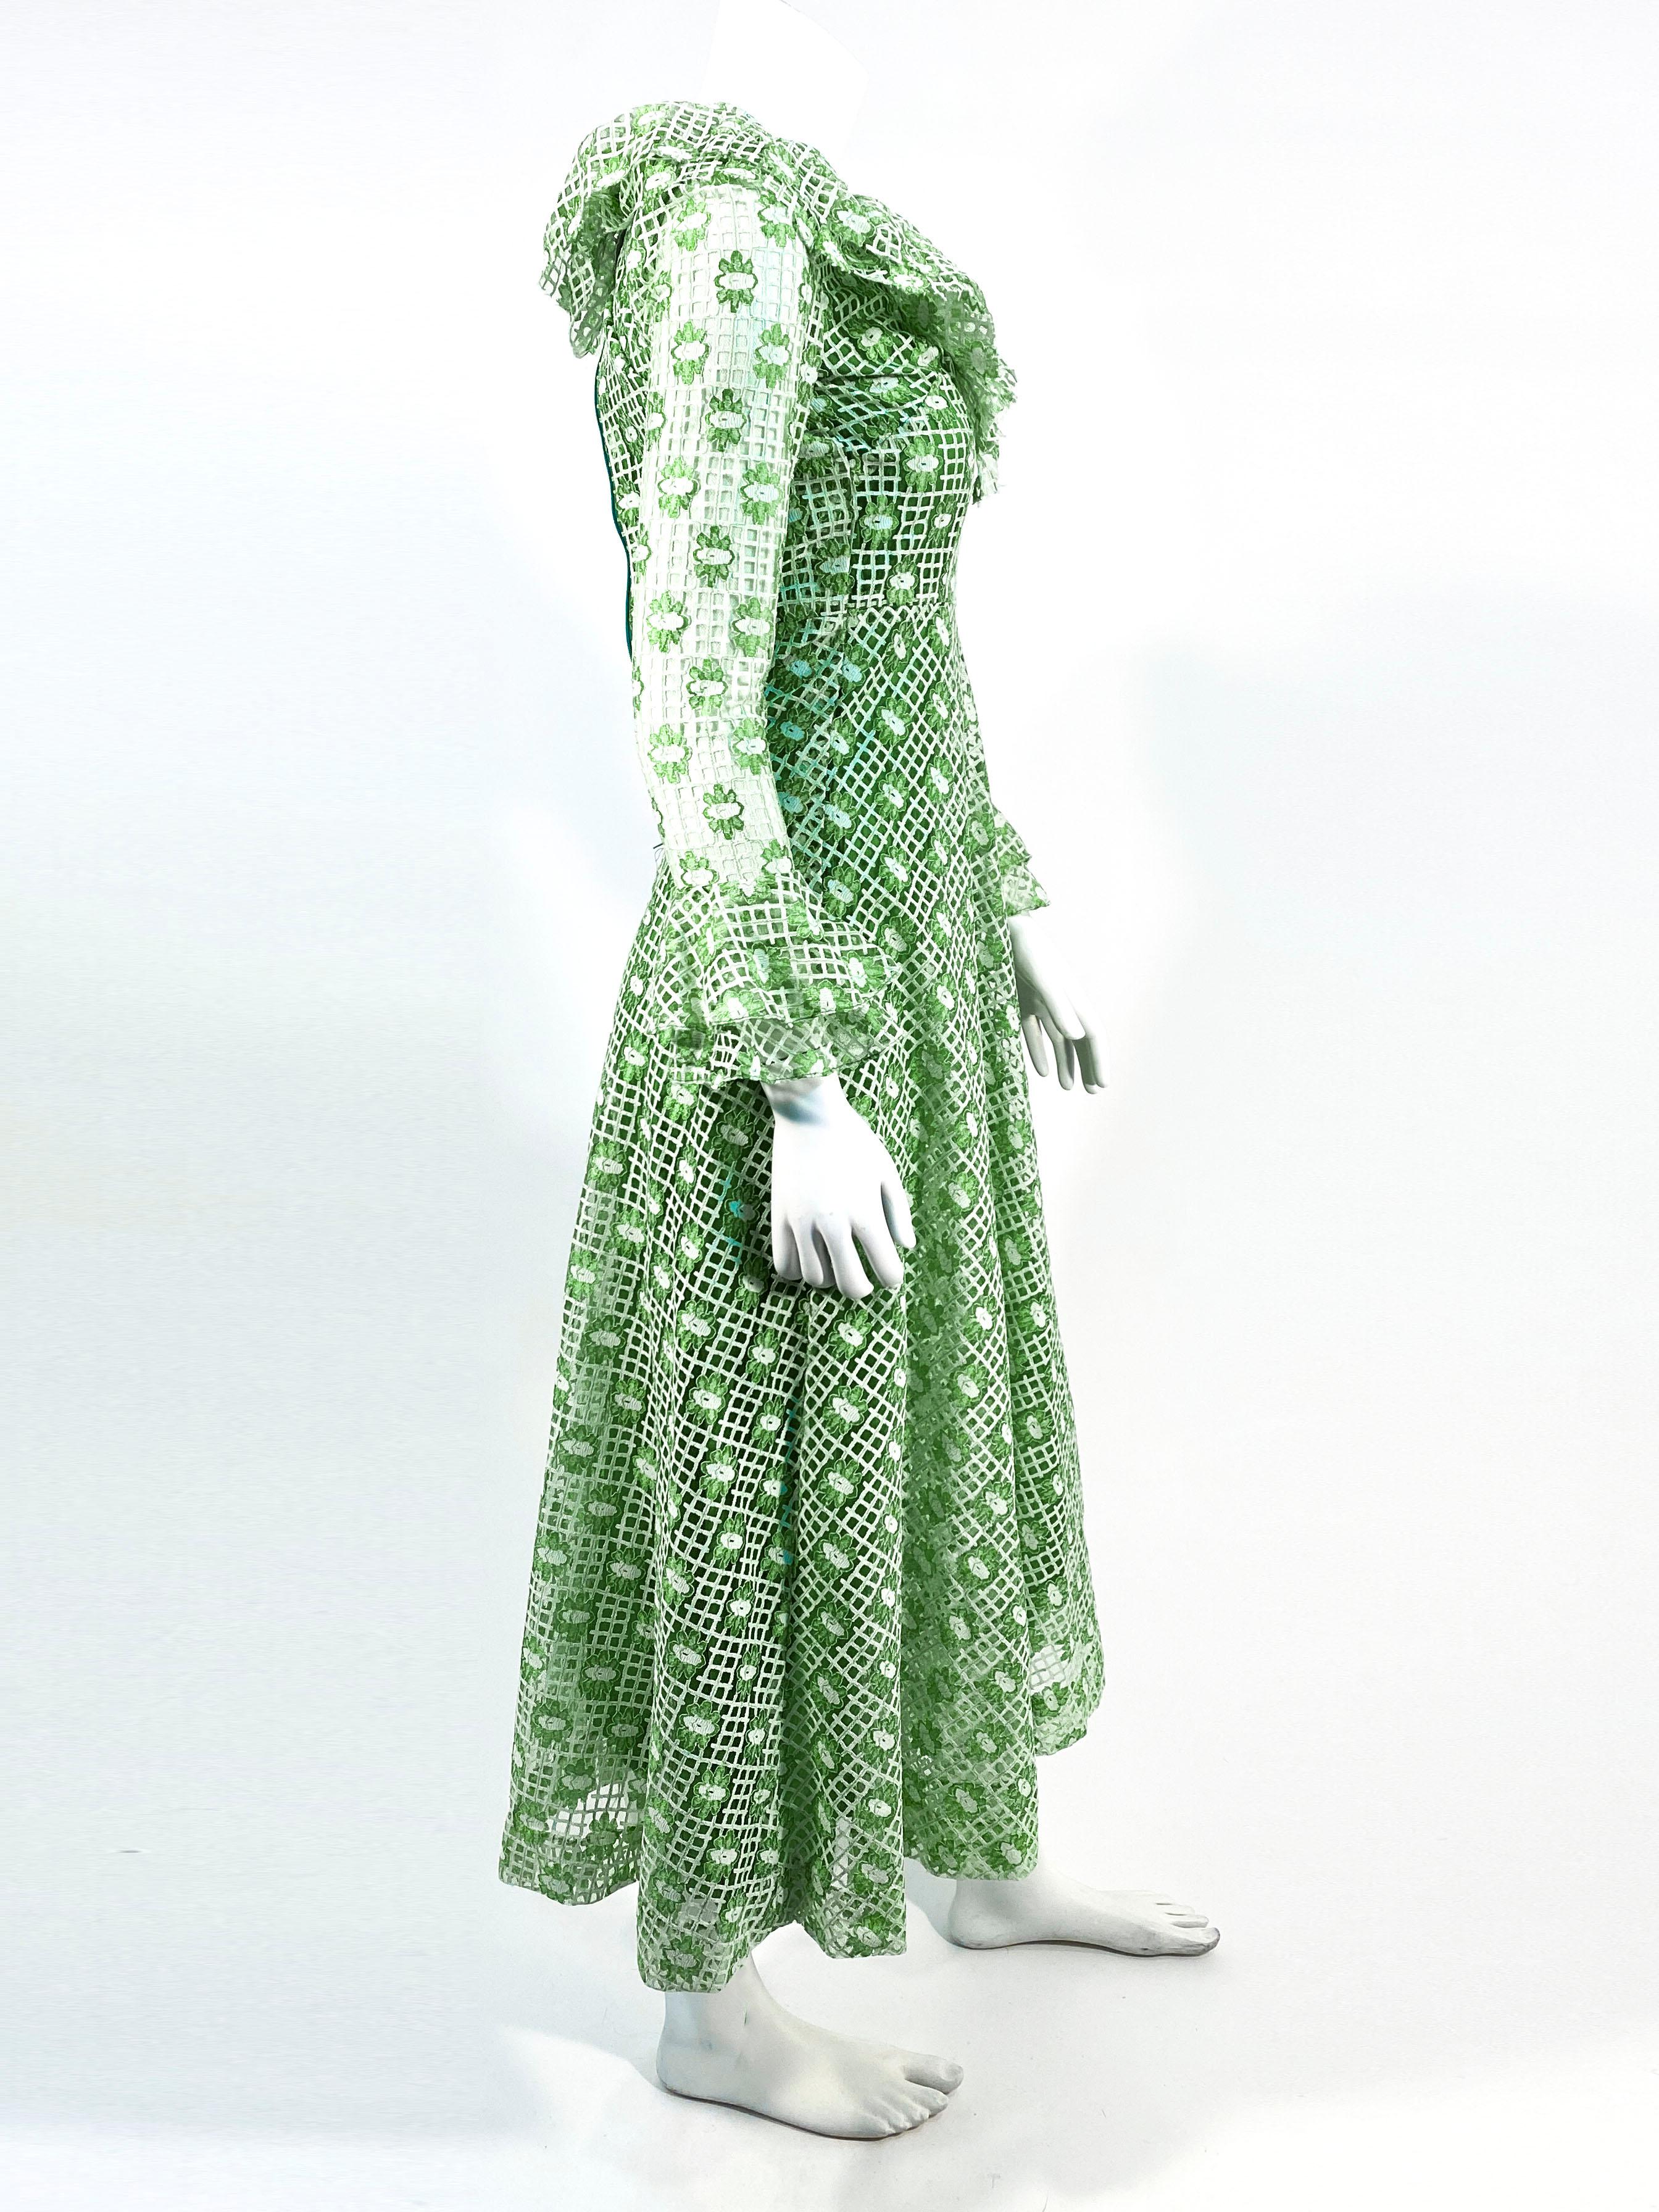 Women's 1960s/1970s I. Magnin Green Lace and Mesh Dress For Sale